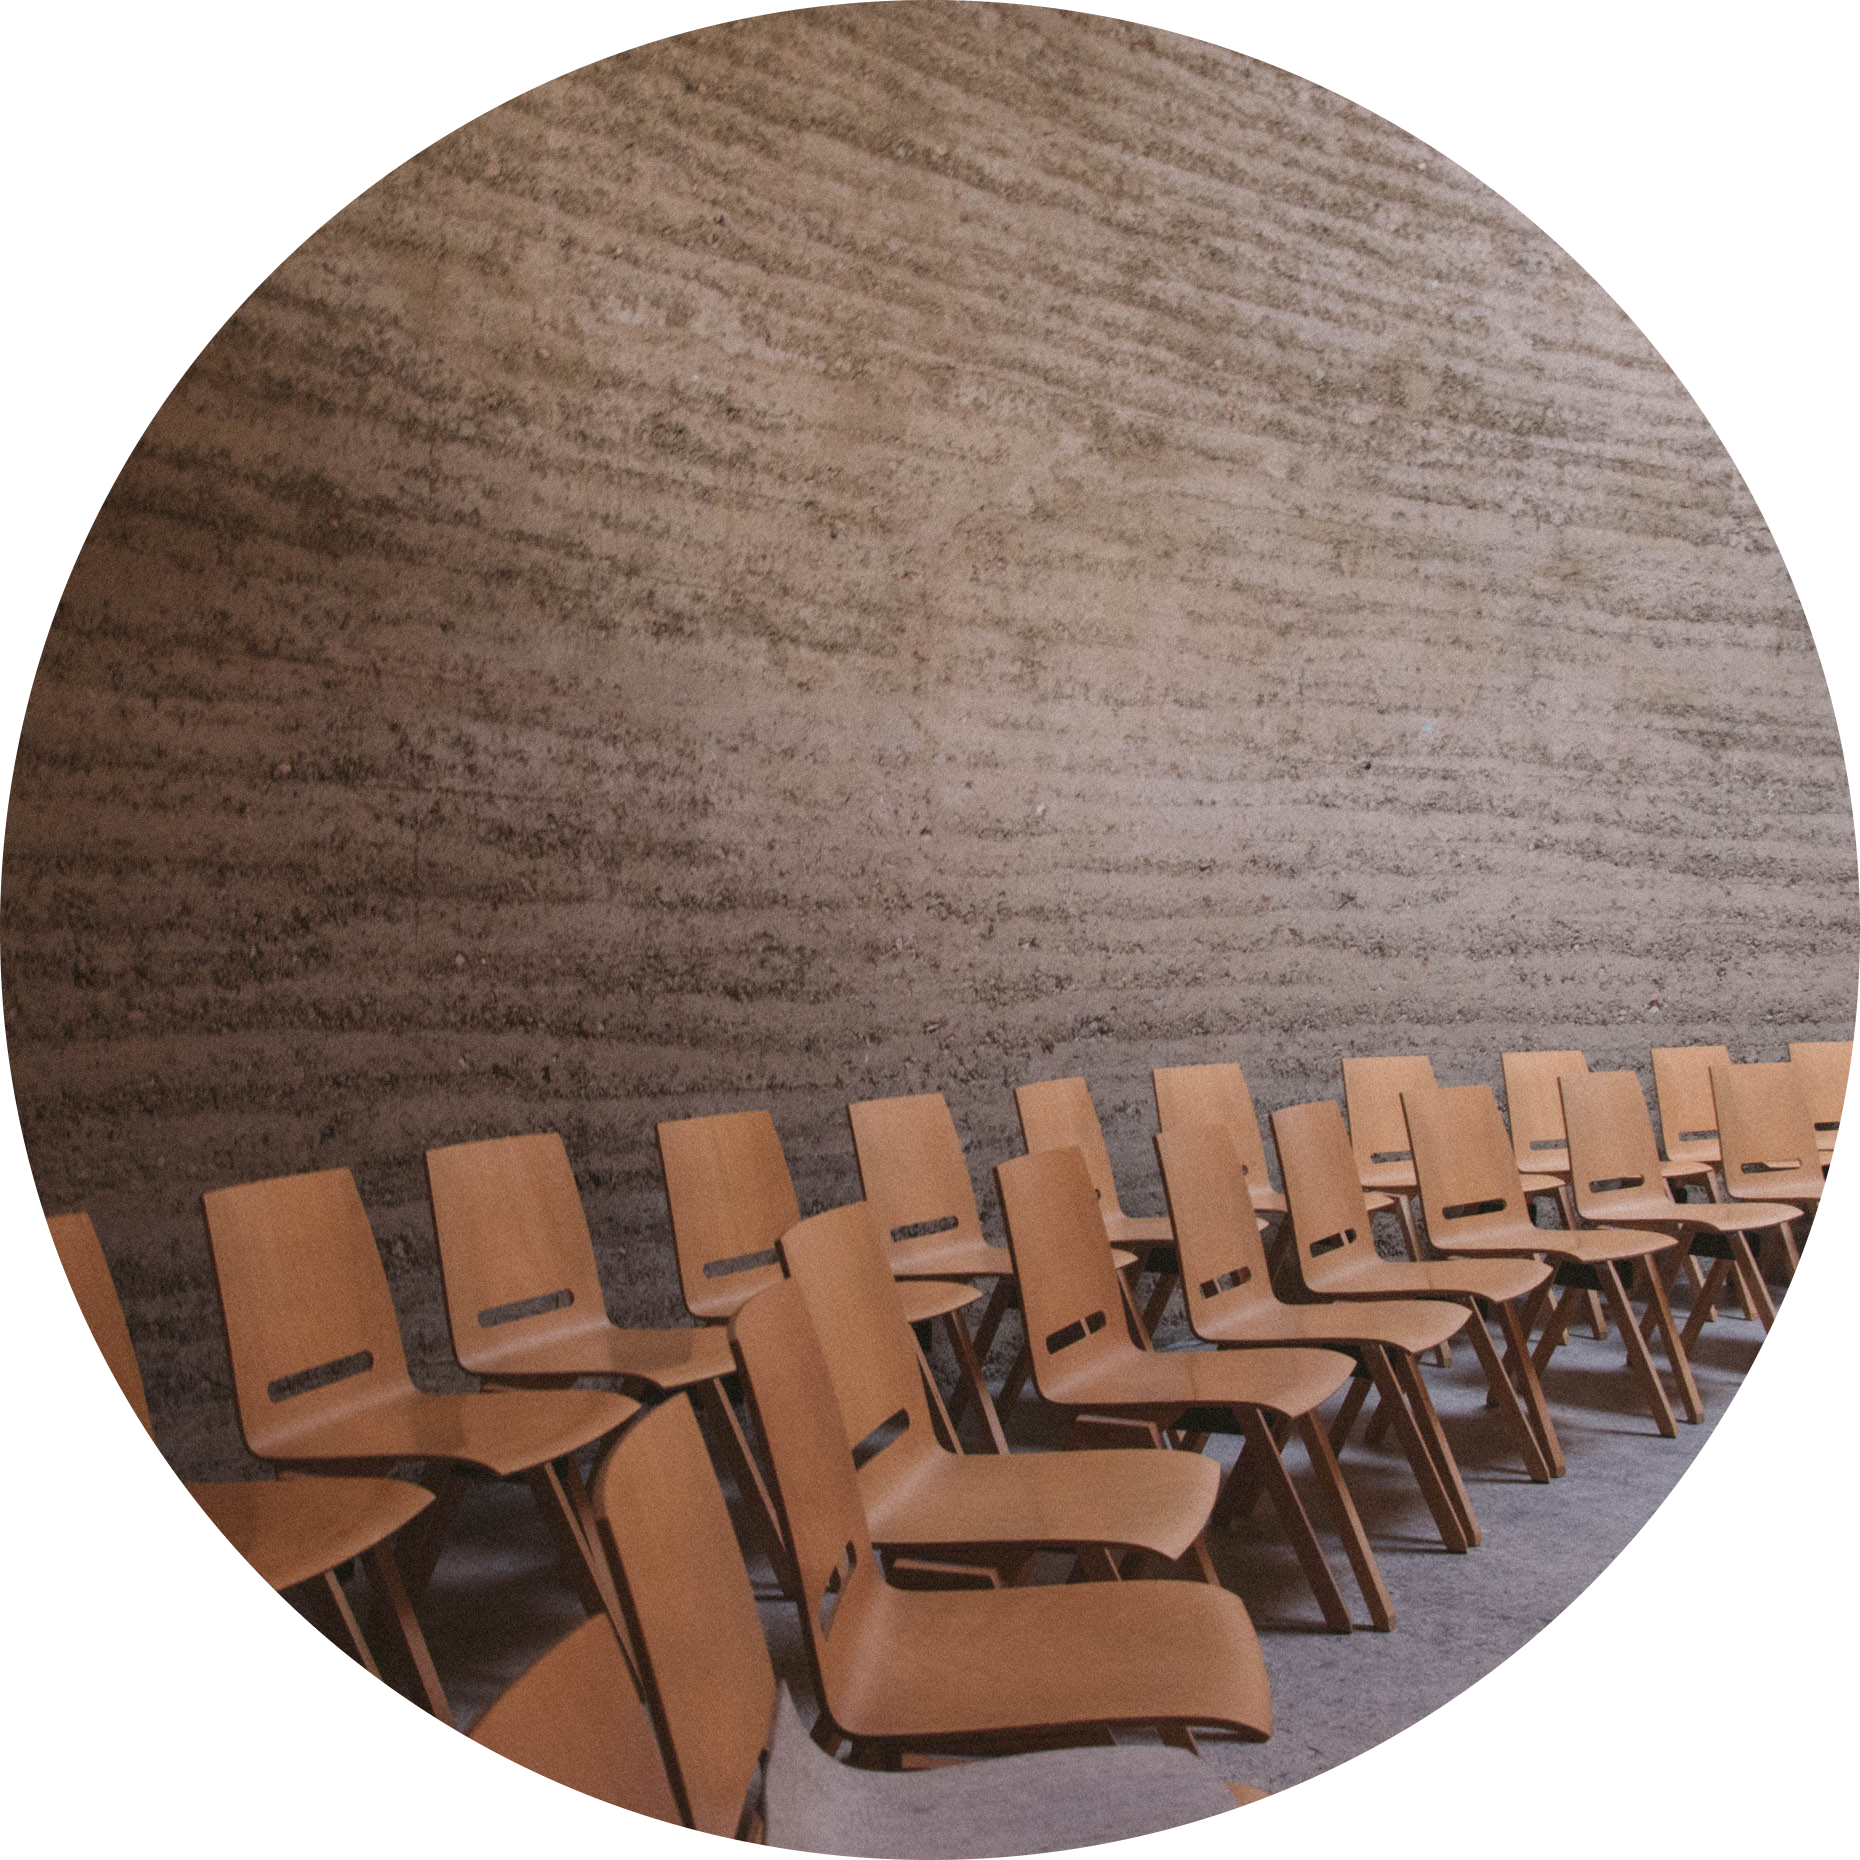 Classroom-021-empty-chairs-circle.png